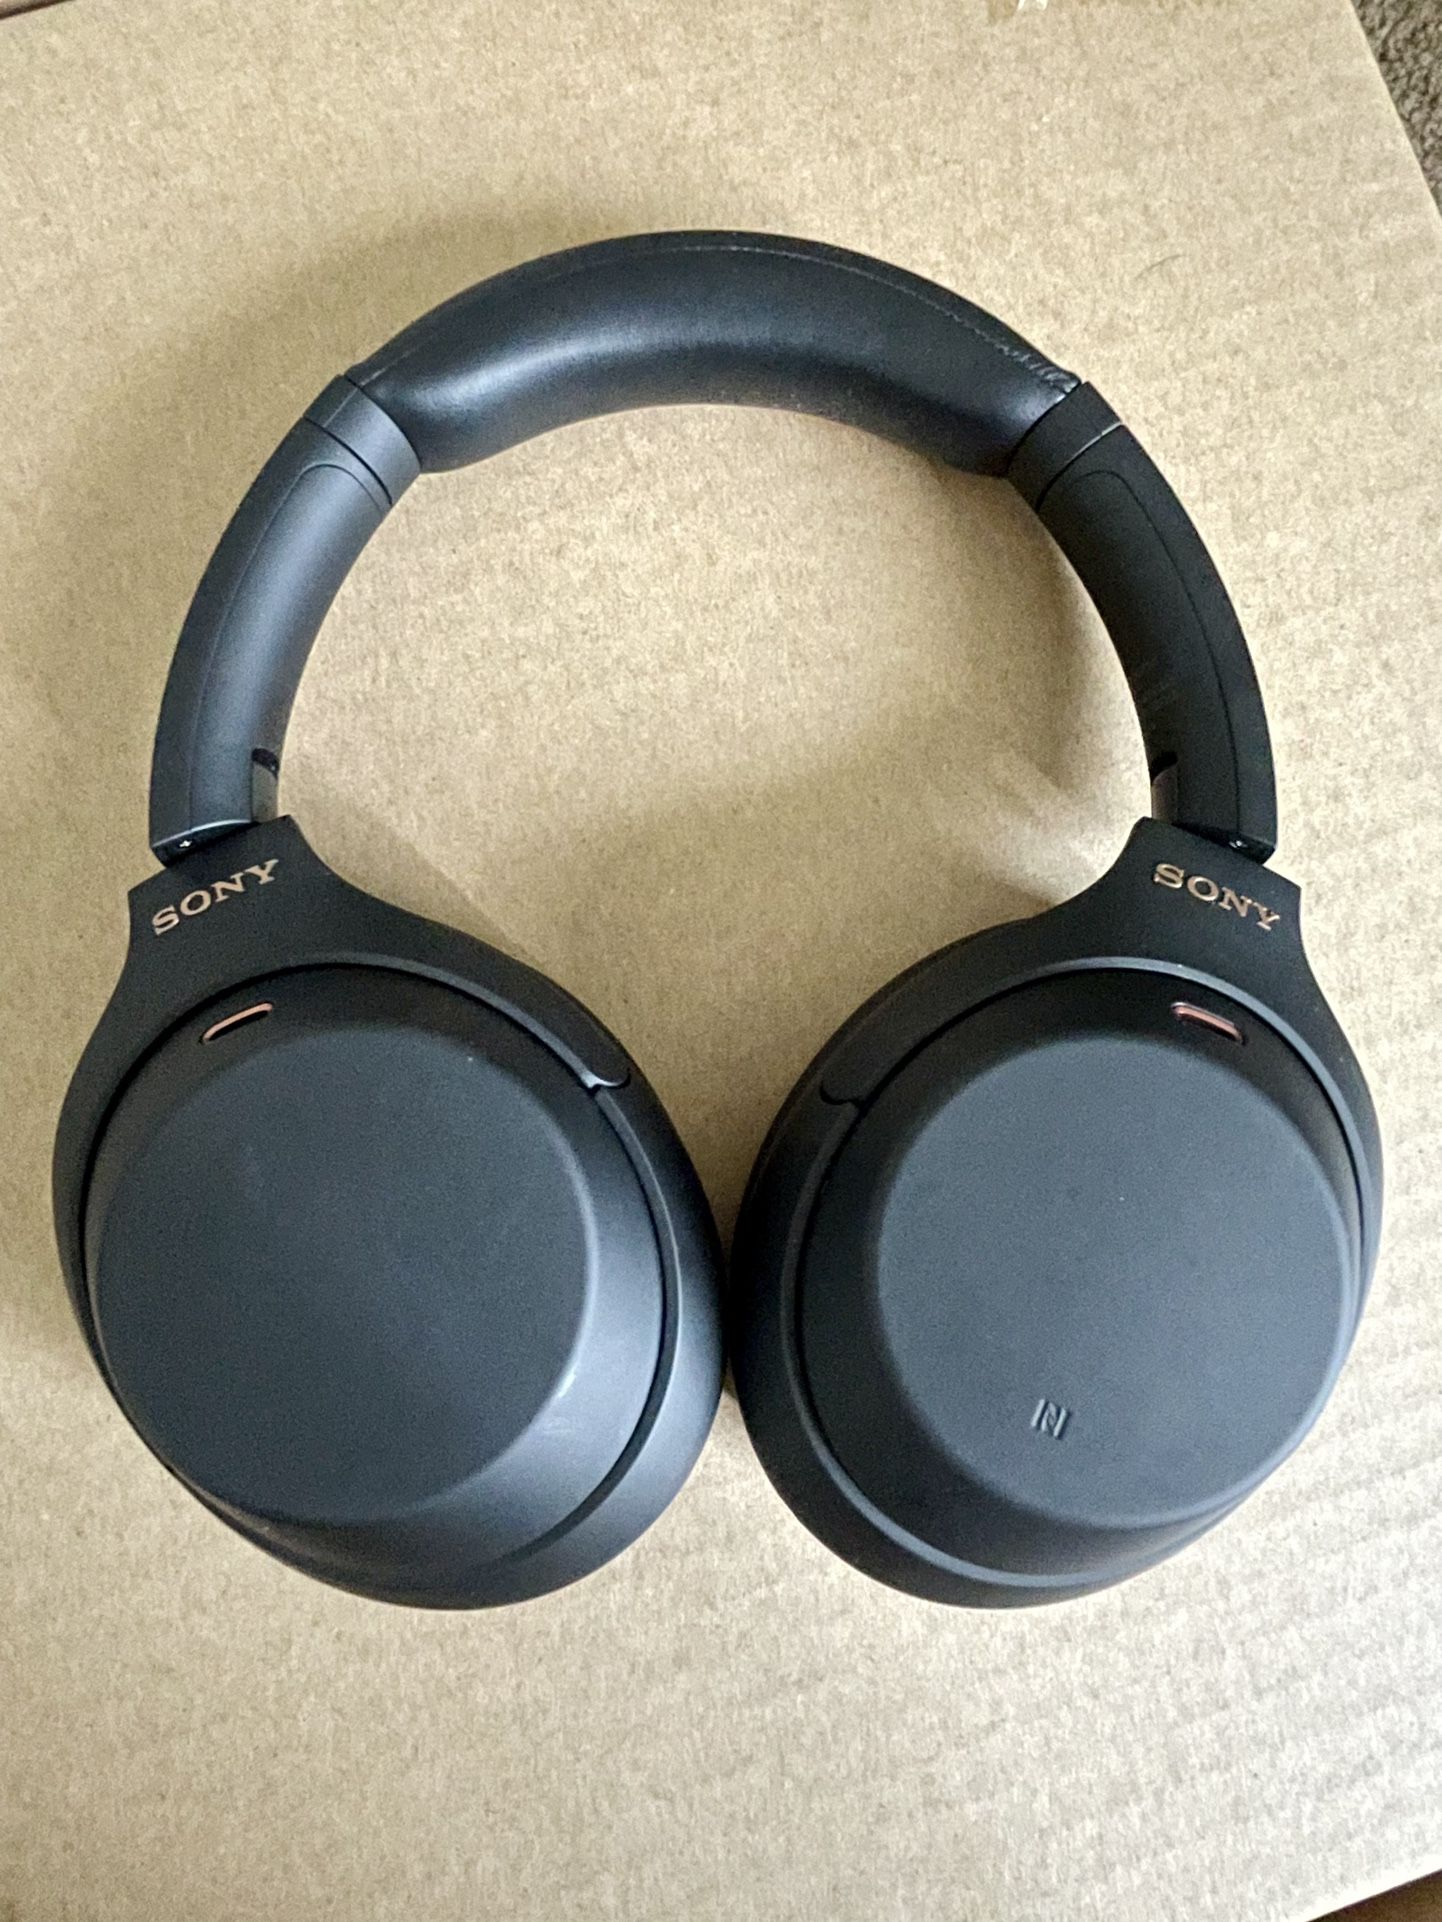  Sony WH-1000XM4 Wireless Noise-Cancelling Over-the-Ear Headphones 